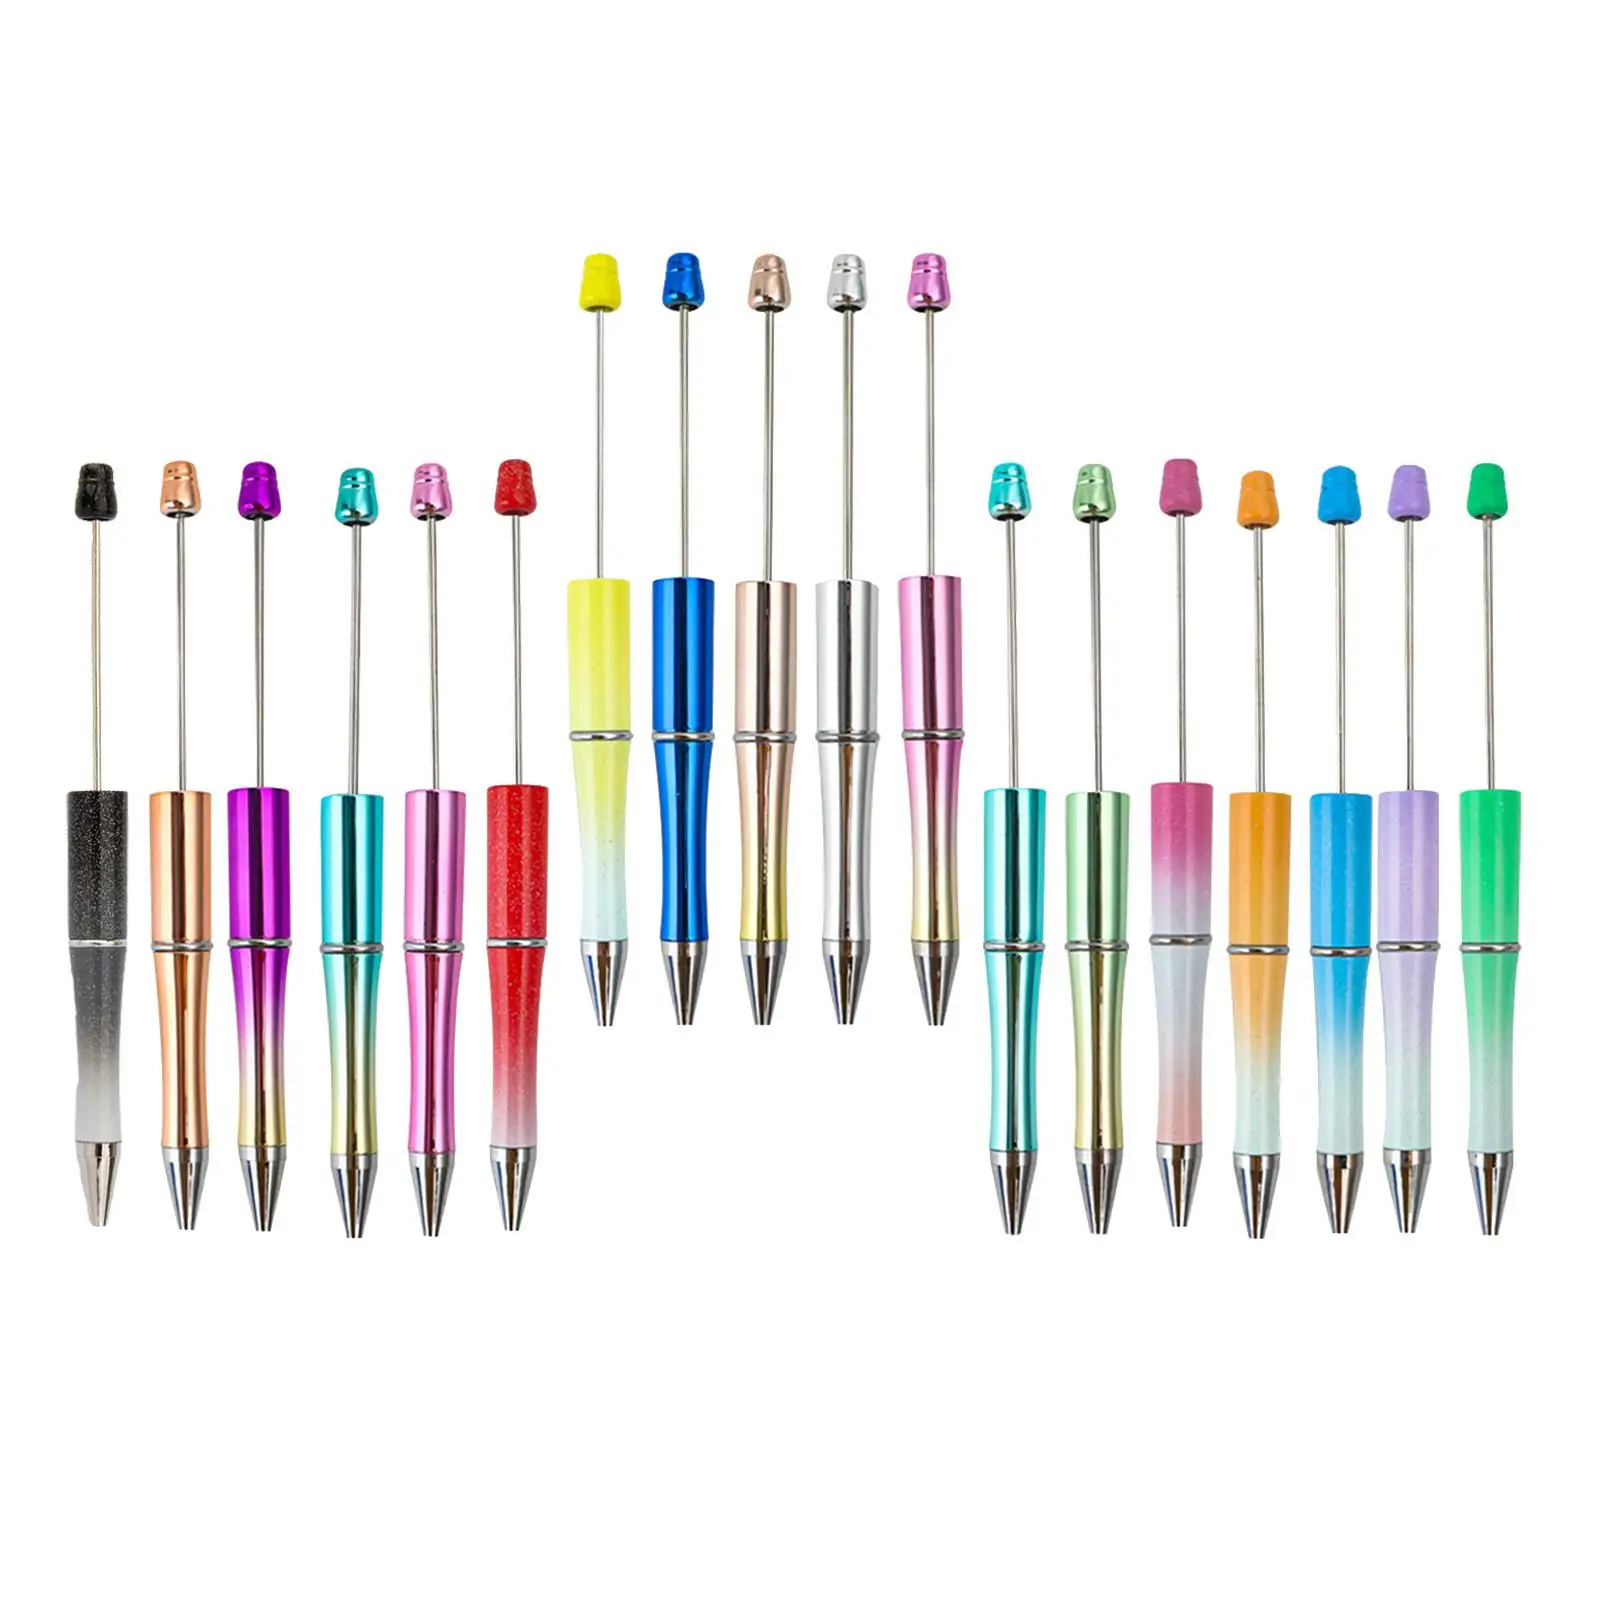 18x Beadable Pen DIY Craft Kits Crafting Pens for Office Classroom School